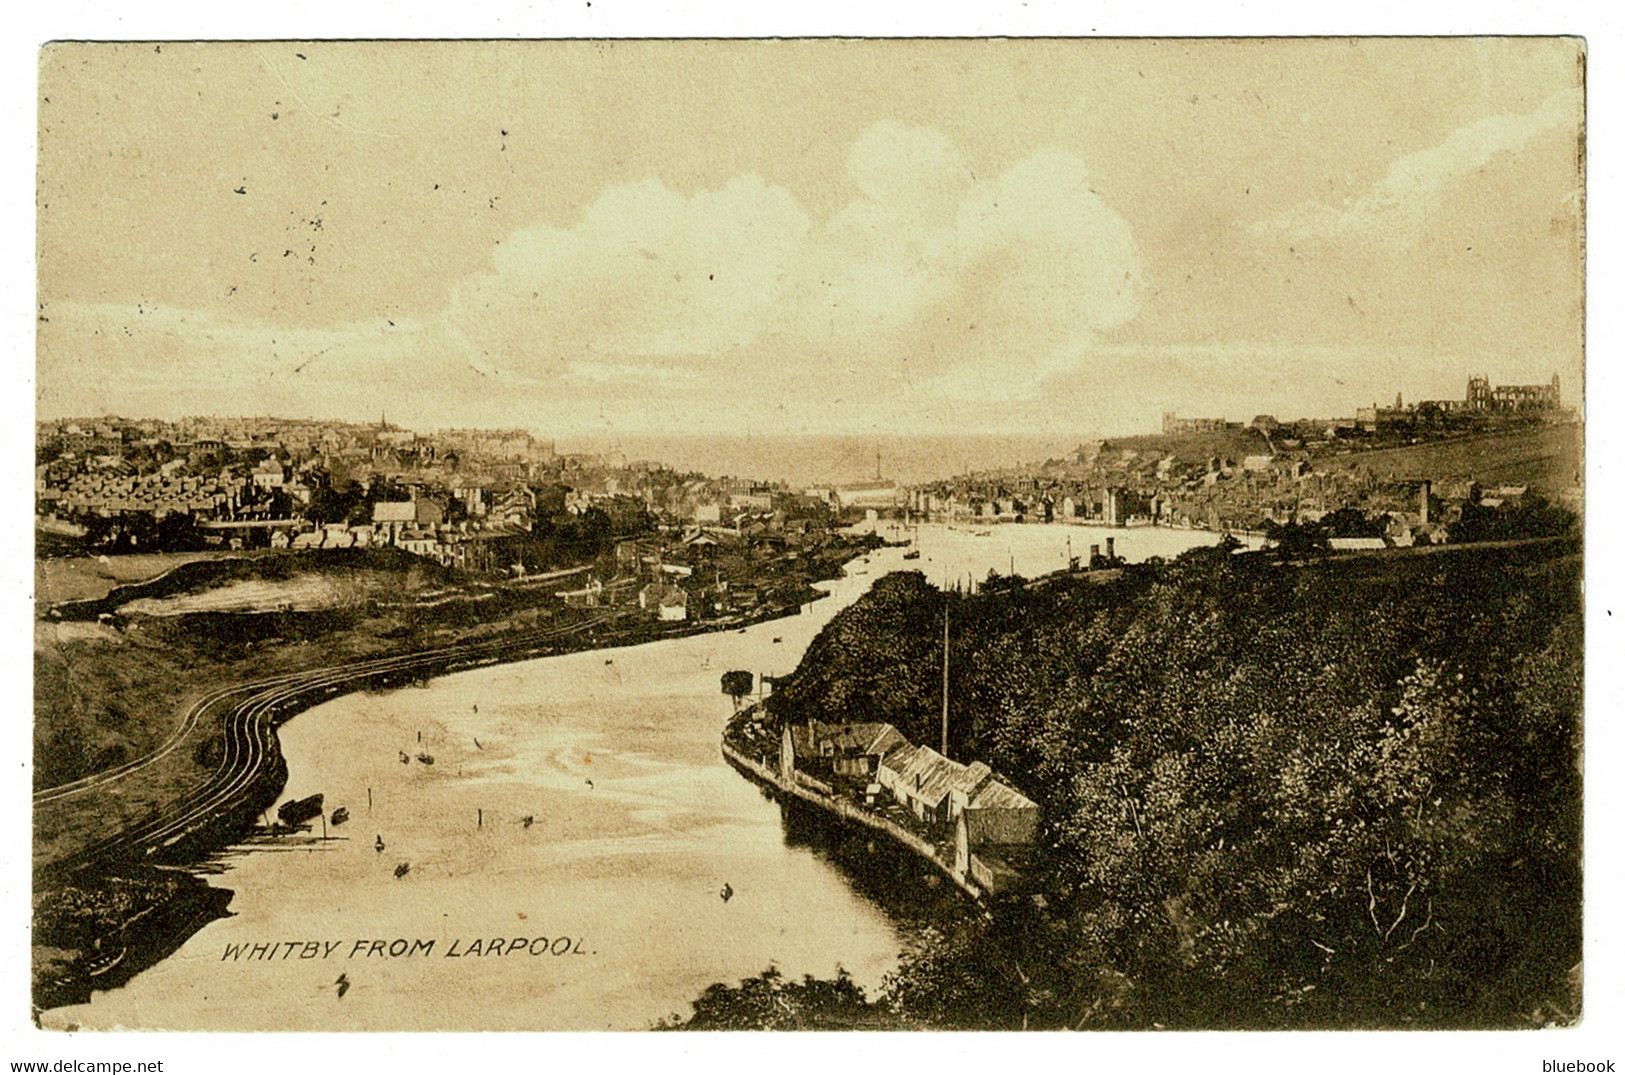 Ref 1520 - C. 1920 Postcard - Whitby From Larpool - Yorkshire - Whitby